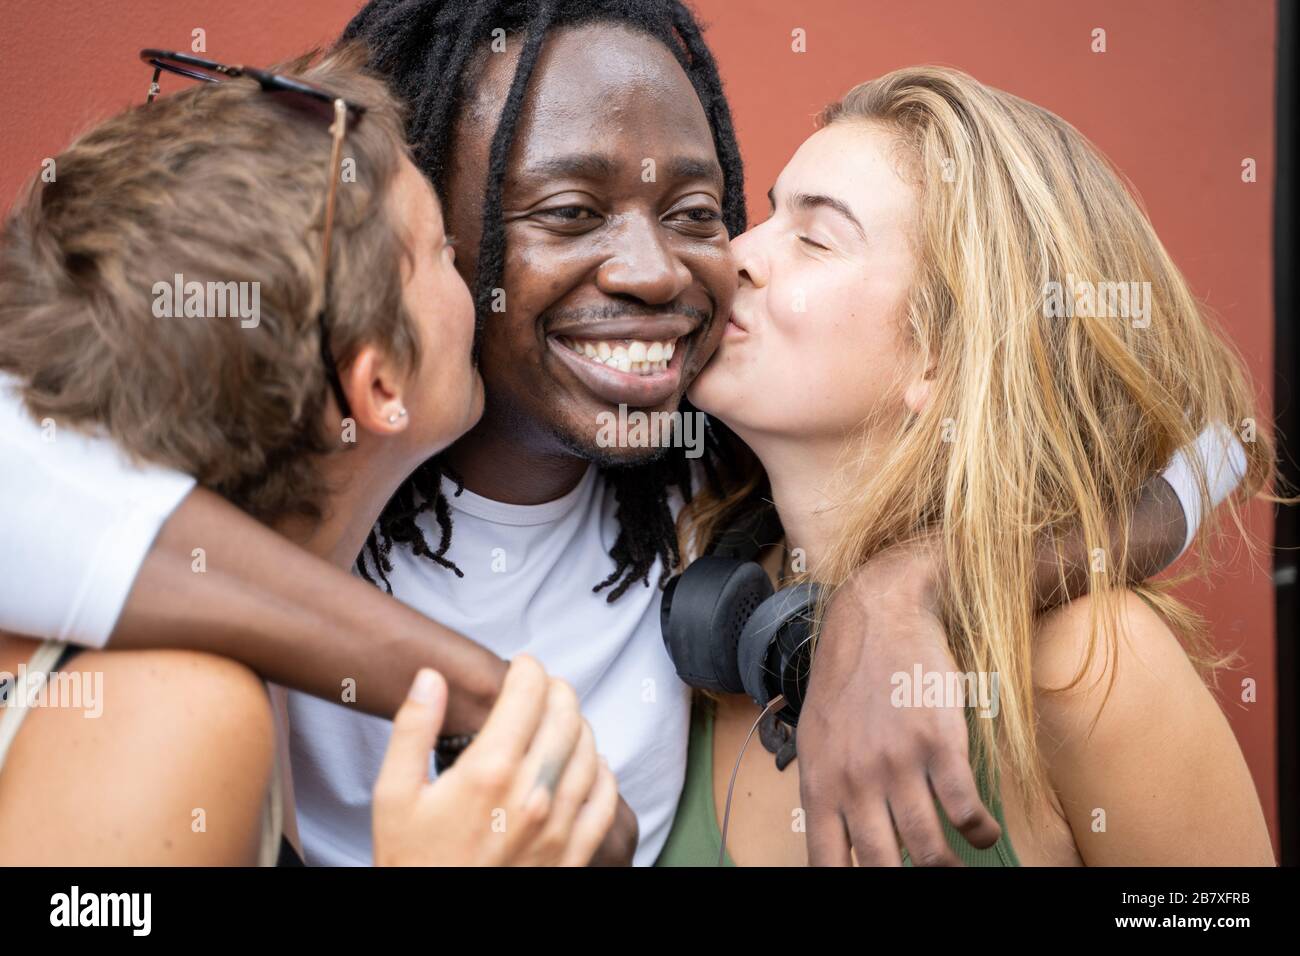 Two blonde girls kissing an African boy by a wall. Multicultural group Stock Photo